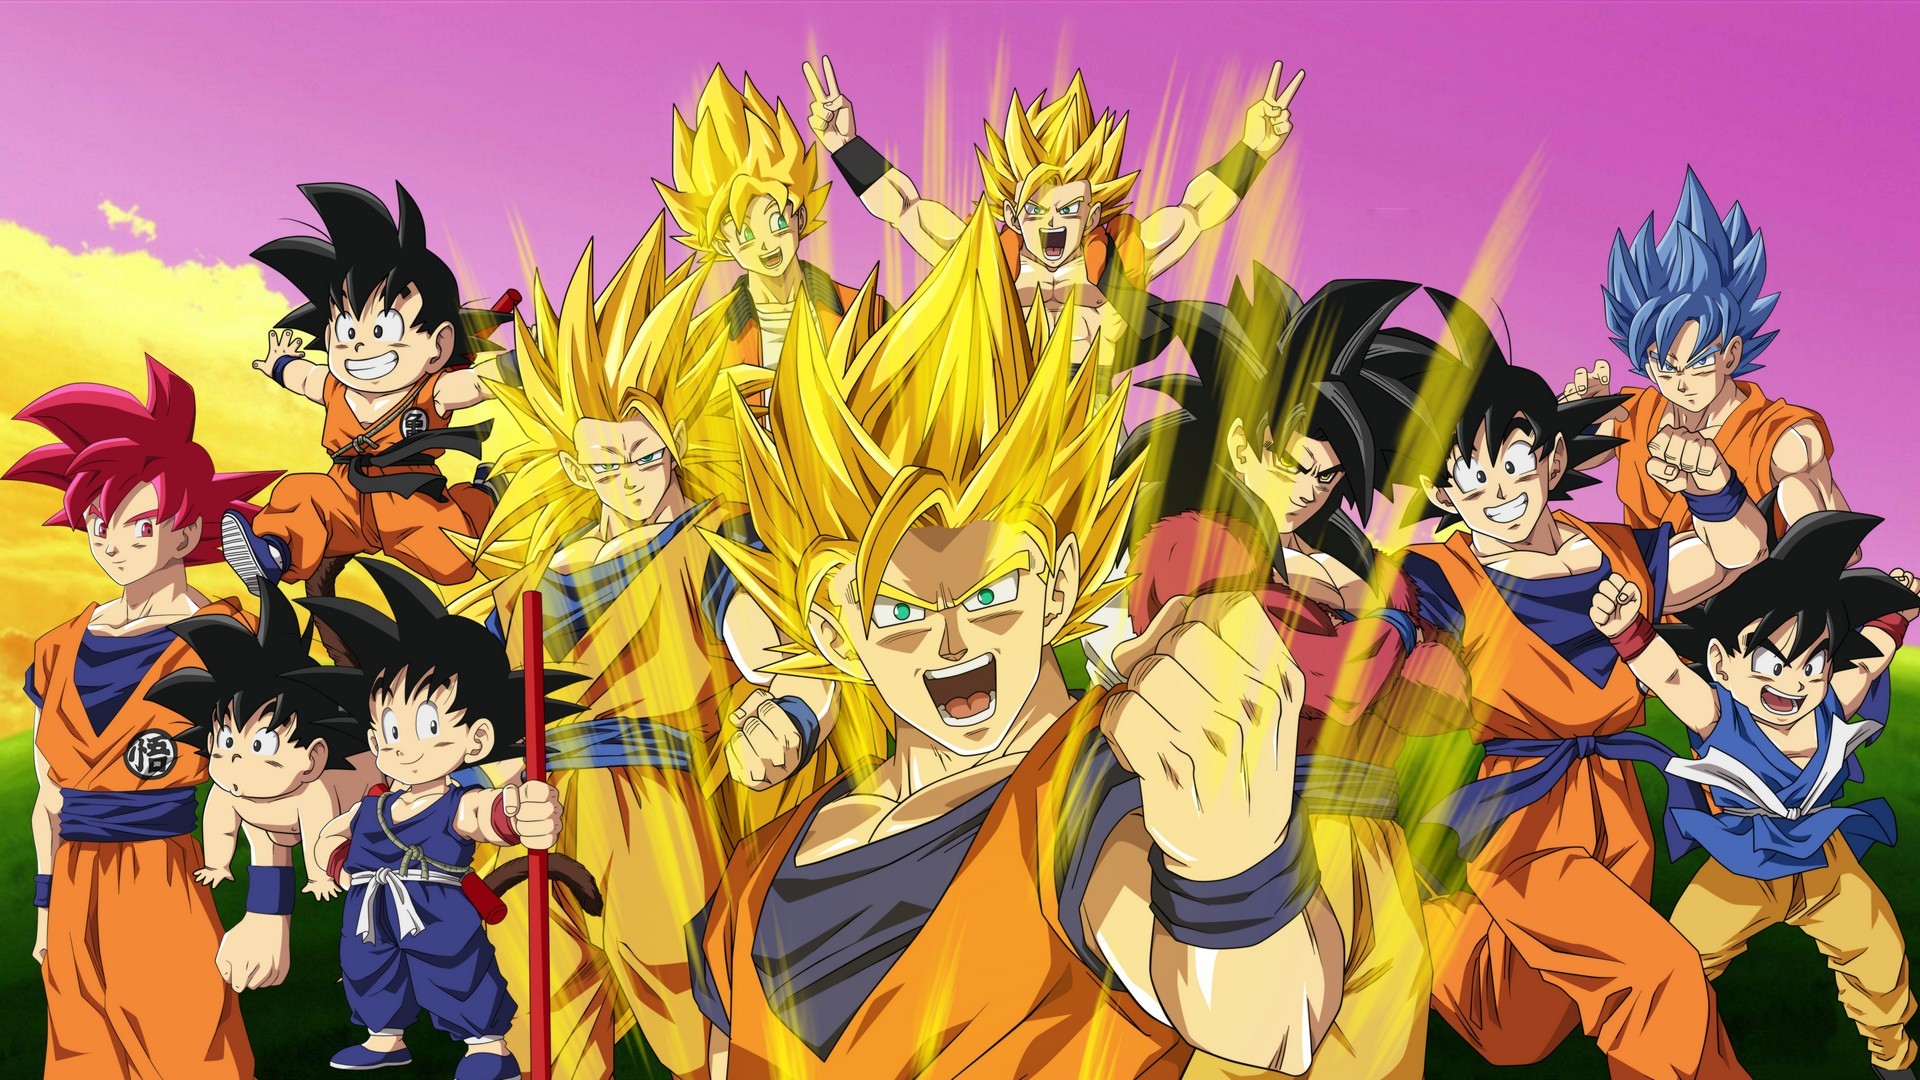 Goku Wallpaper For Desktop with resolution 1920X1080 pixel. You can use this wallpaper as background for your desktop Computer Screensavers, Android or iPhone smartphones